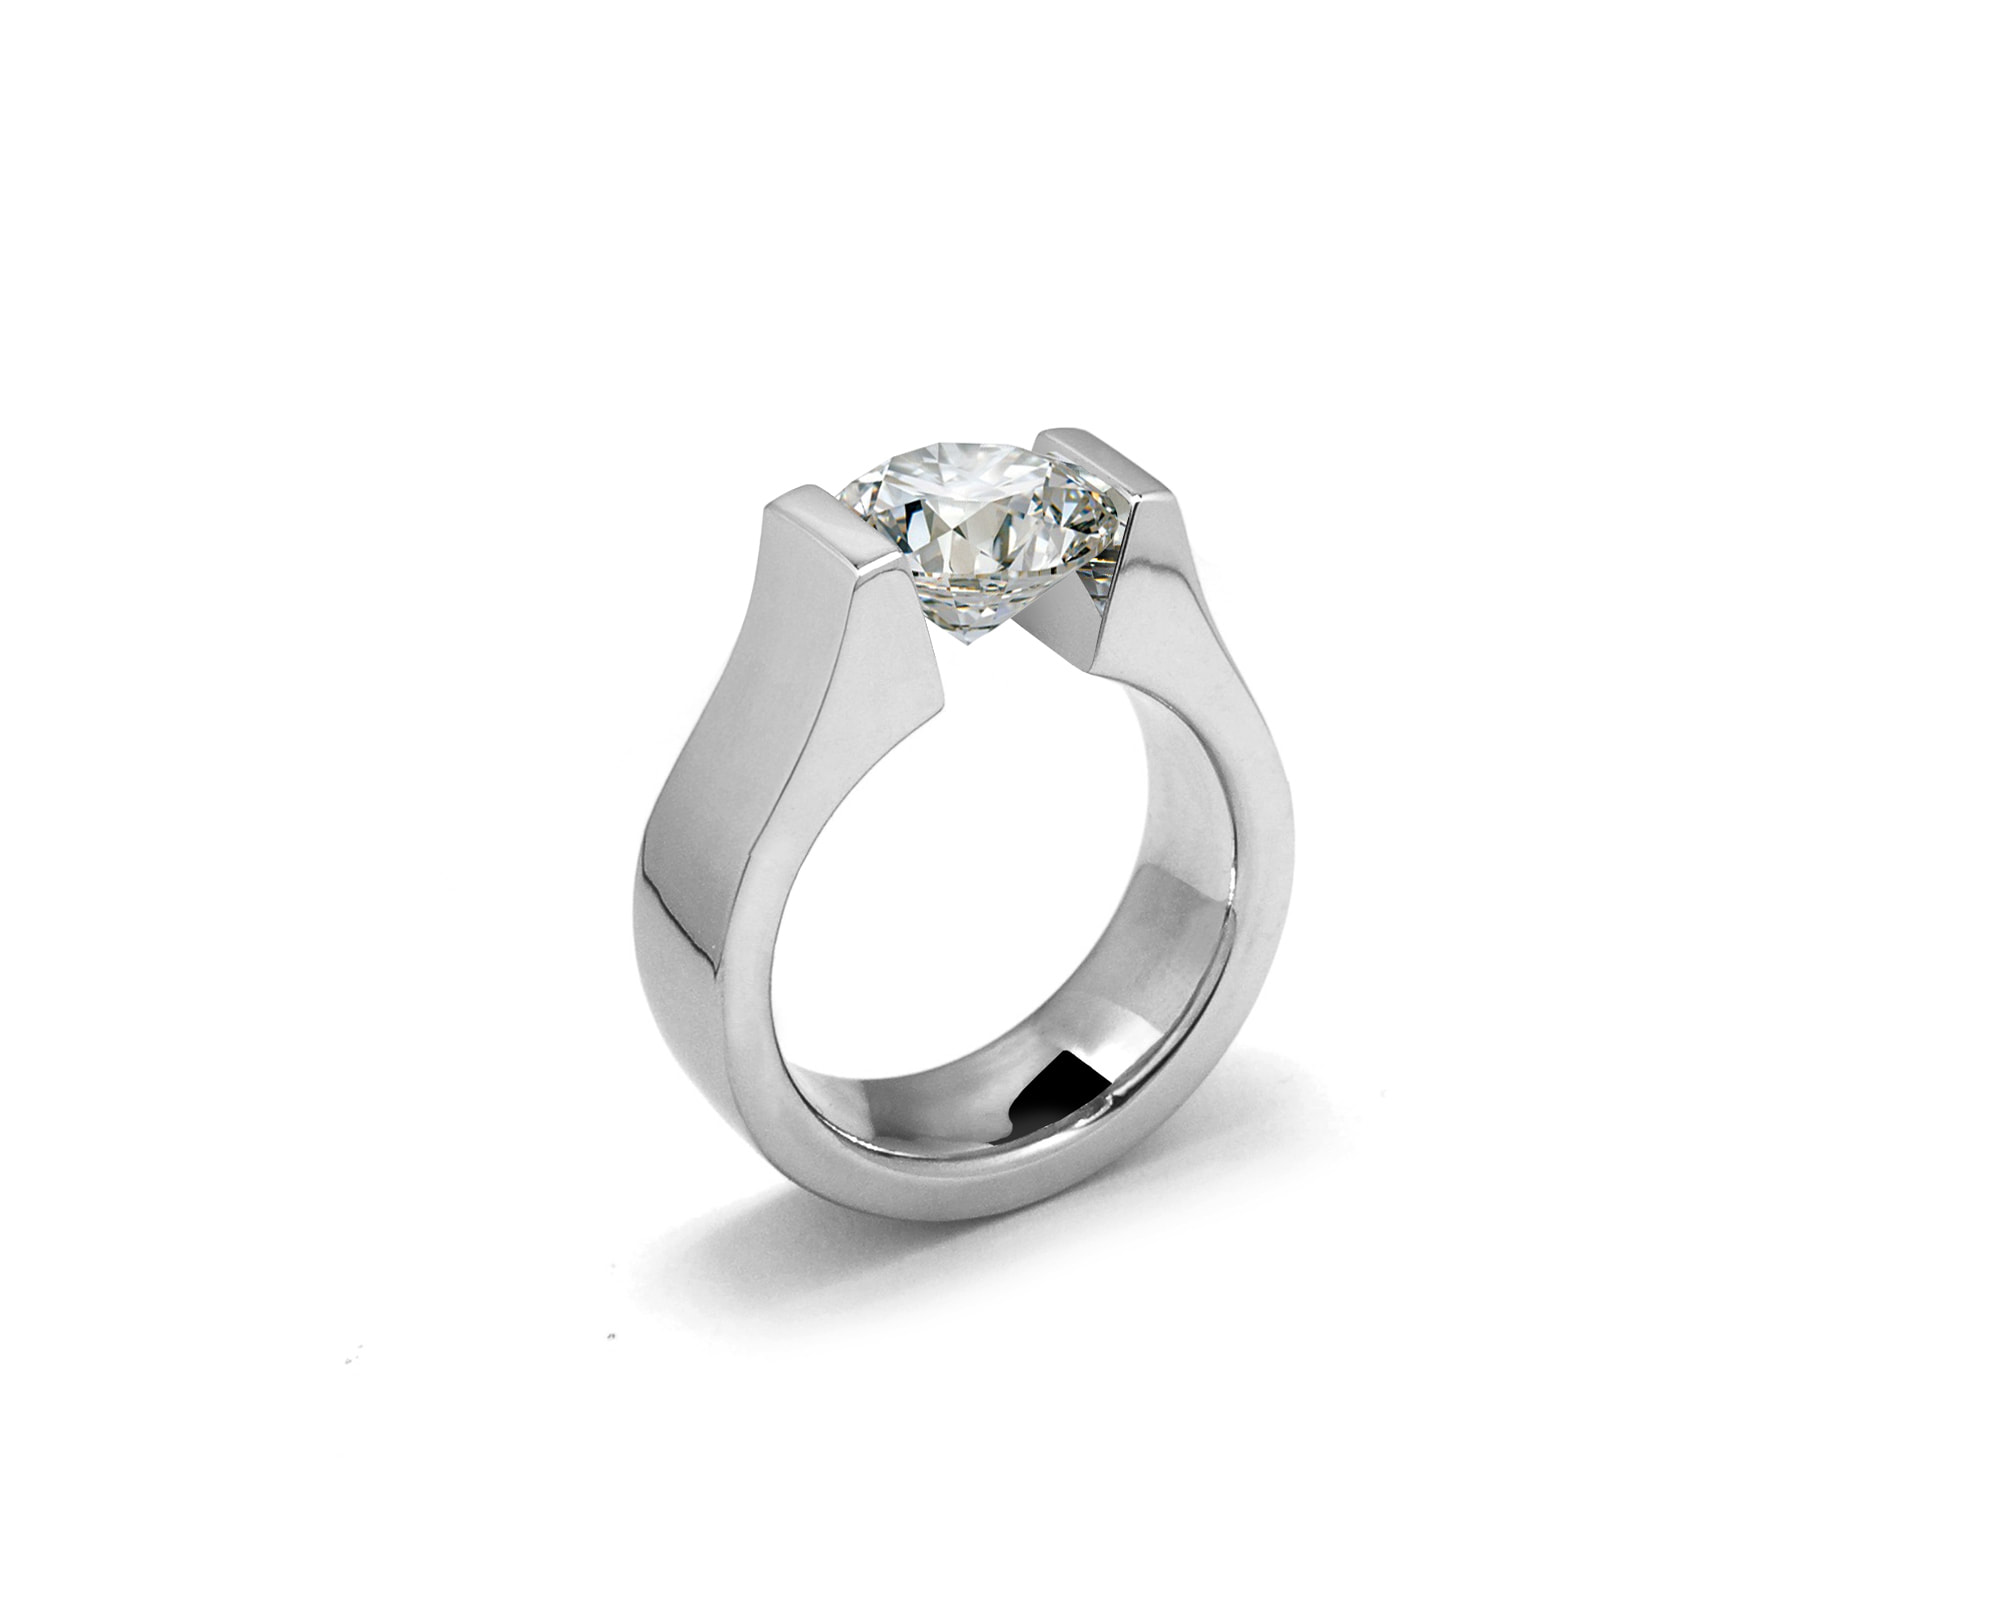 Twisted Bypass Solitaire Tension Set Engagement Ring 14k White Gold - U4377